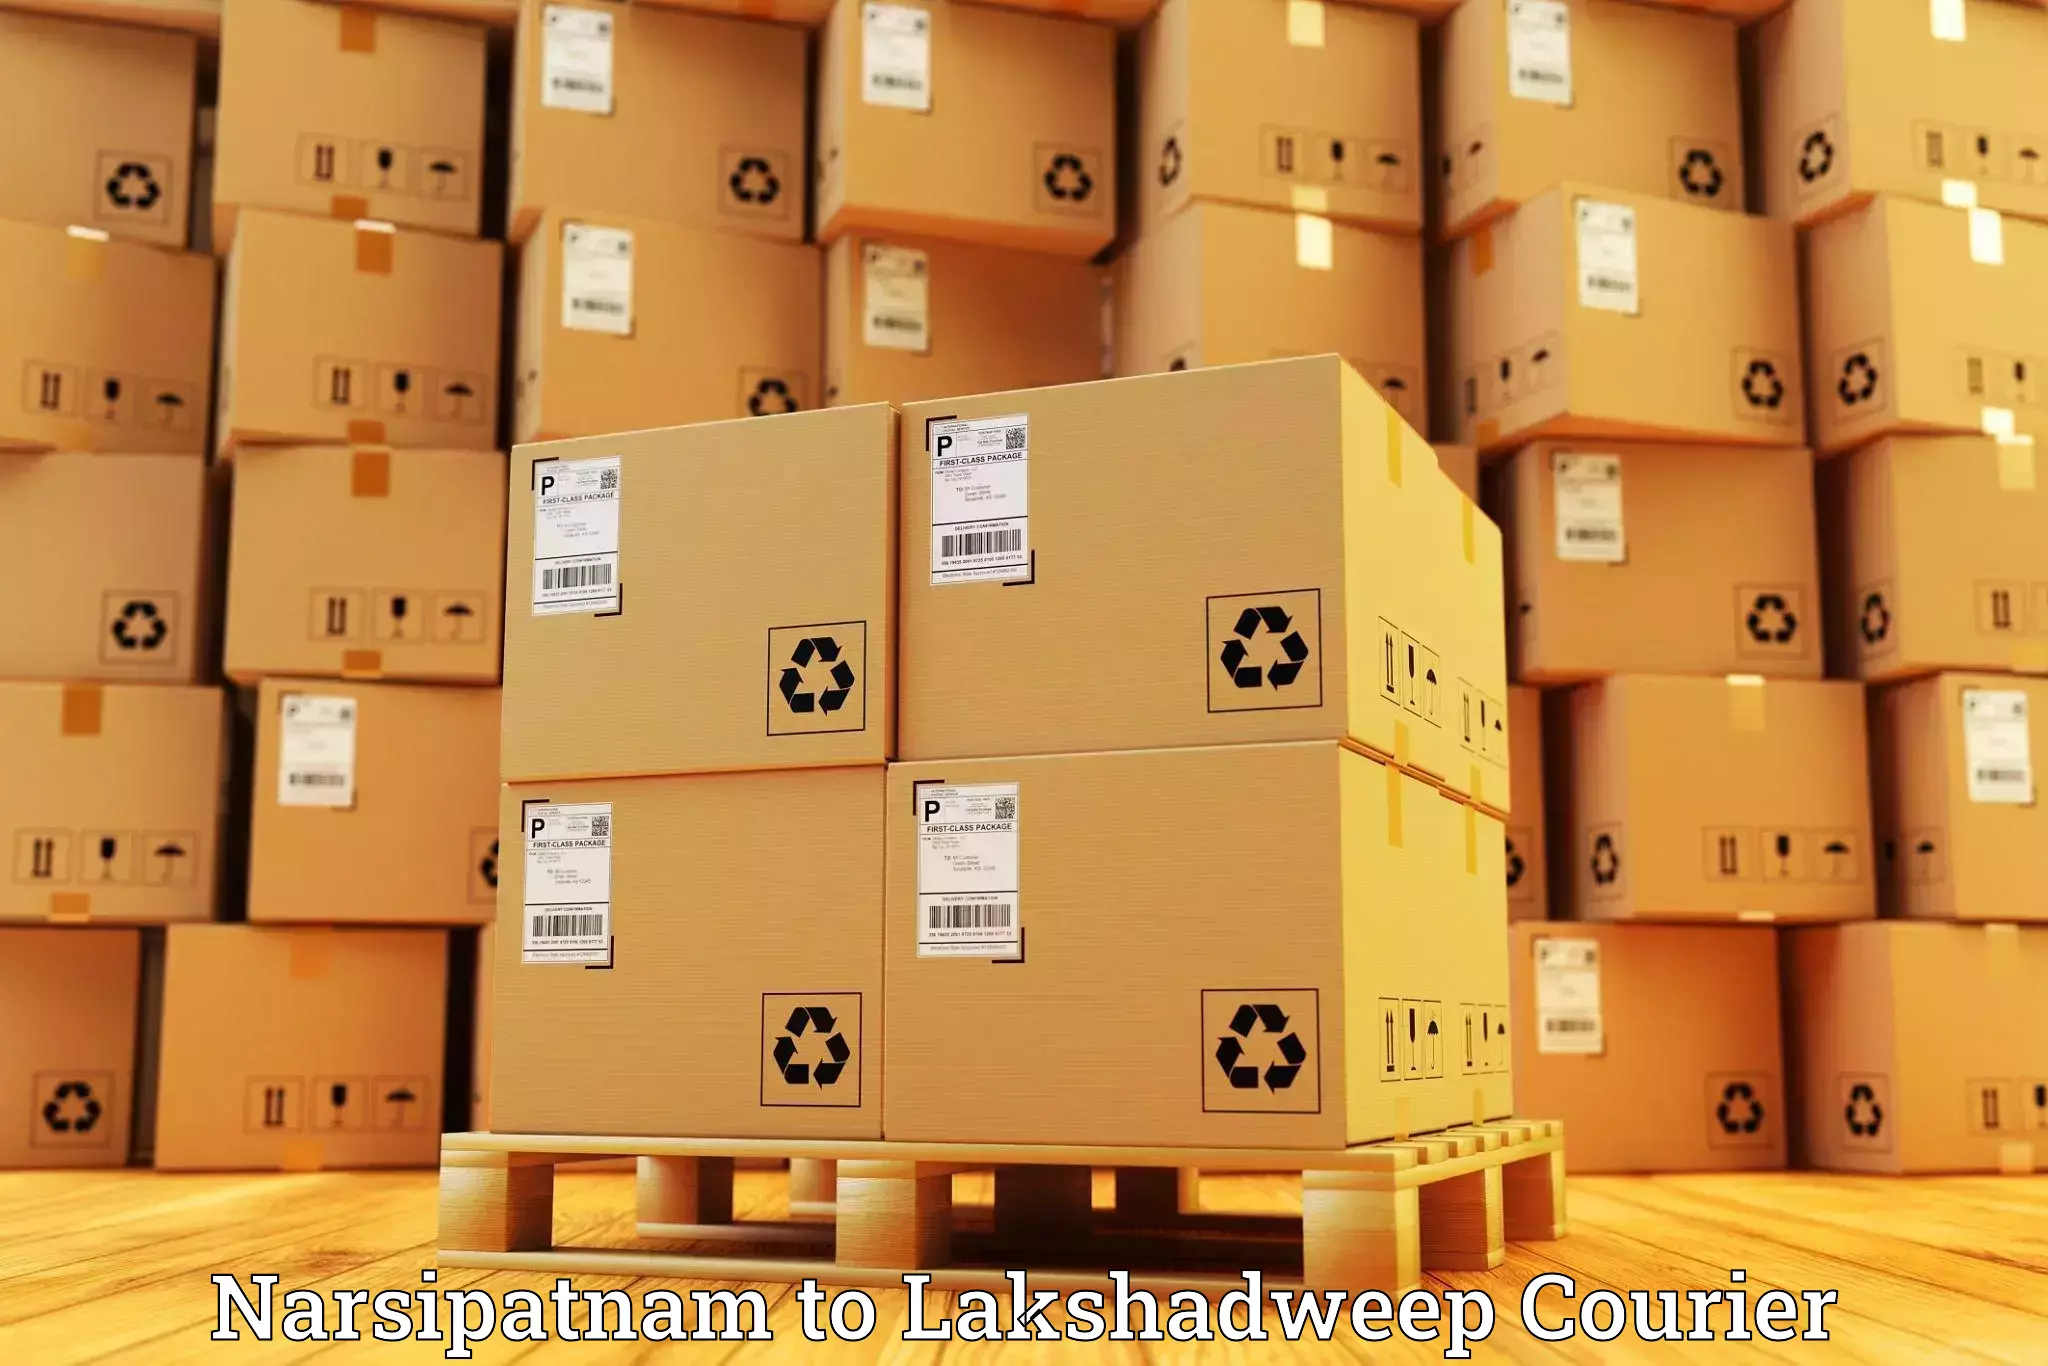 State-of-the-art courier technology Narsipatnam to Lakshadweep